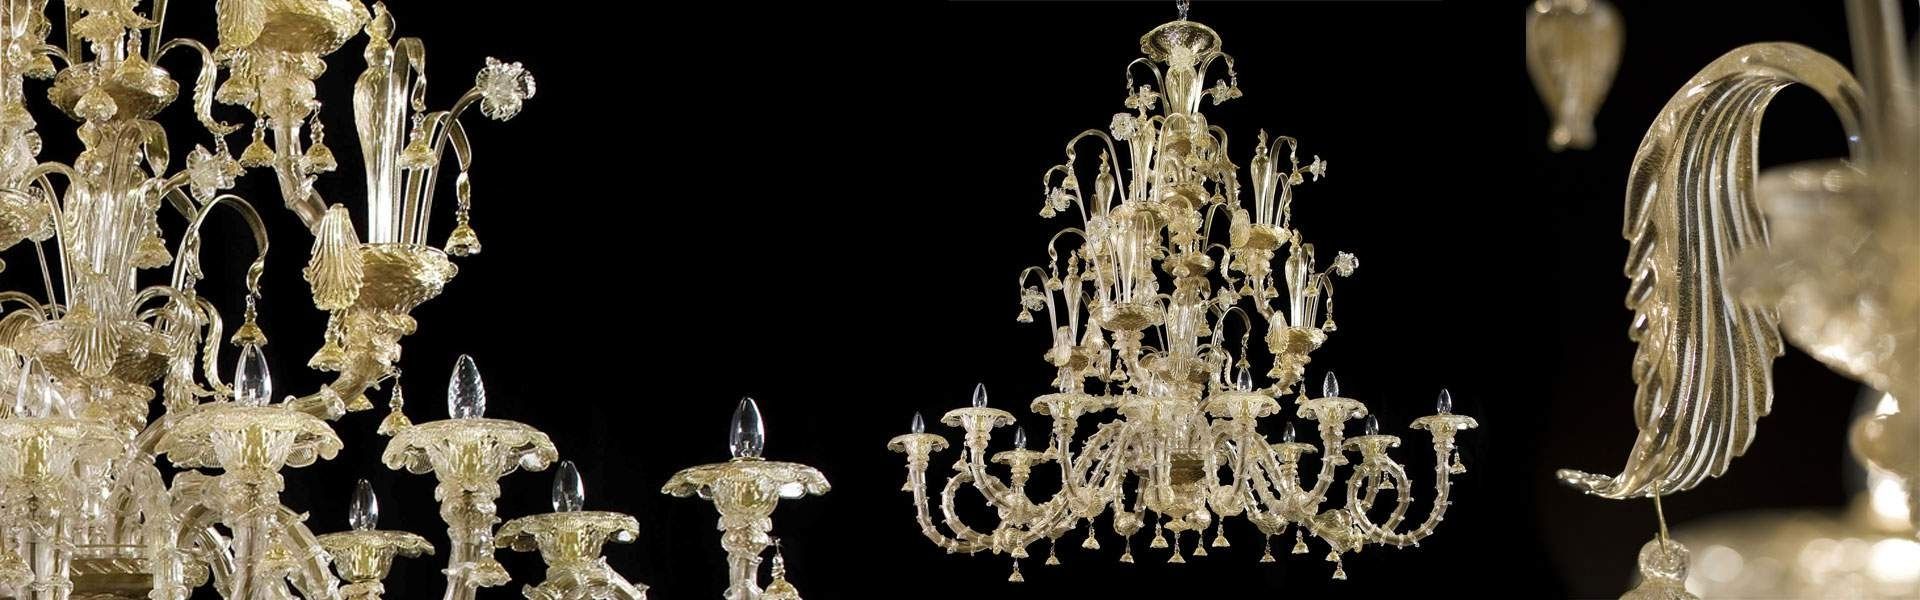 Murano Chandelier With Regard To Famous ⇒ Murano Chandeliers (View 16 of 20)